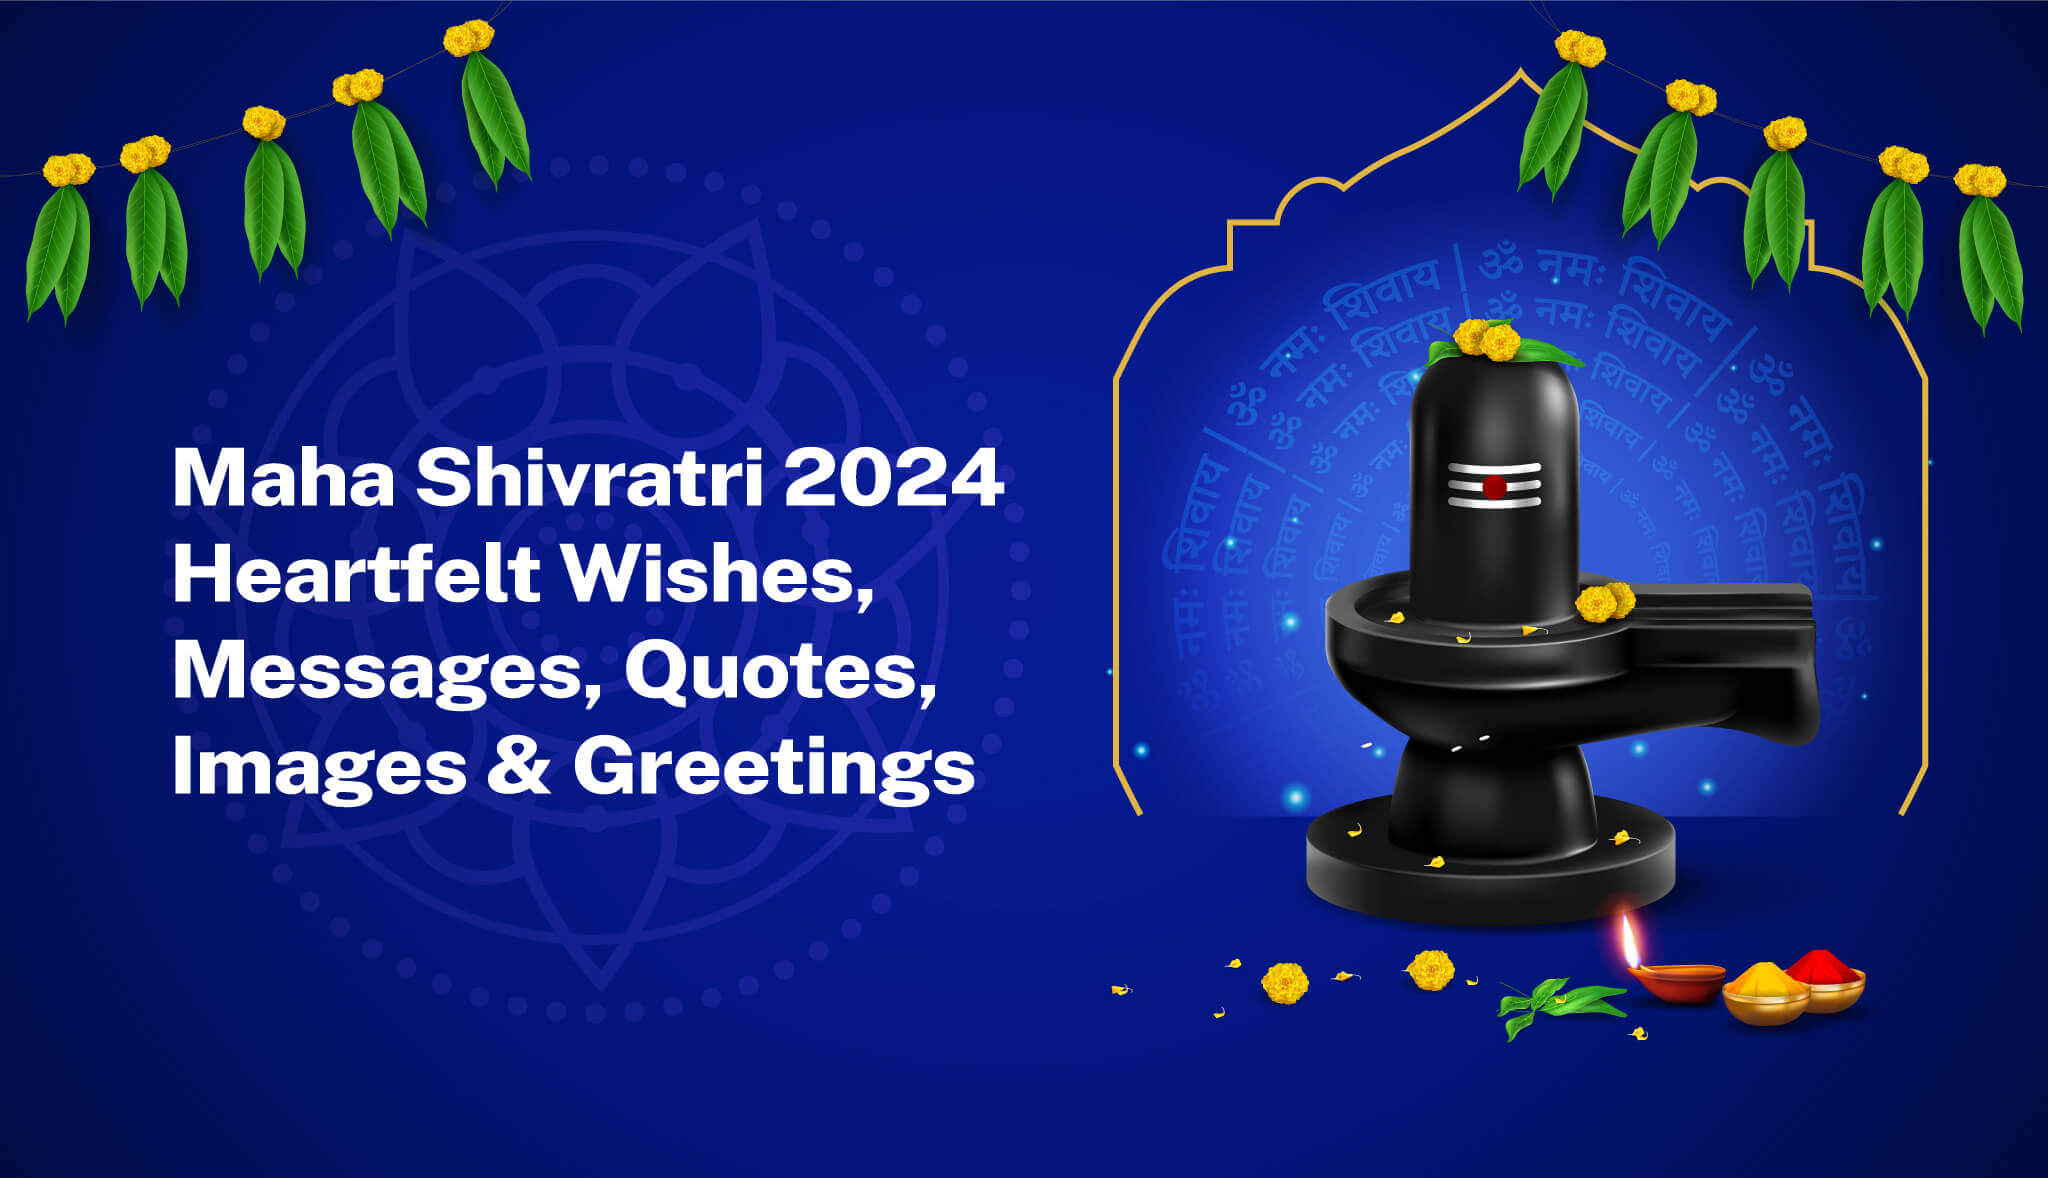 Maha Shivratri 2024: Quotes, Wishes, Greetings, Images, Messges